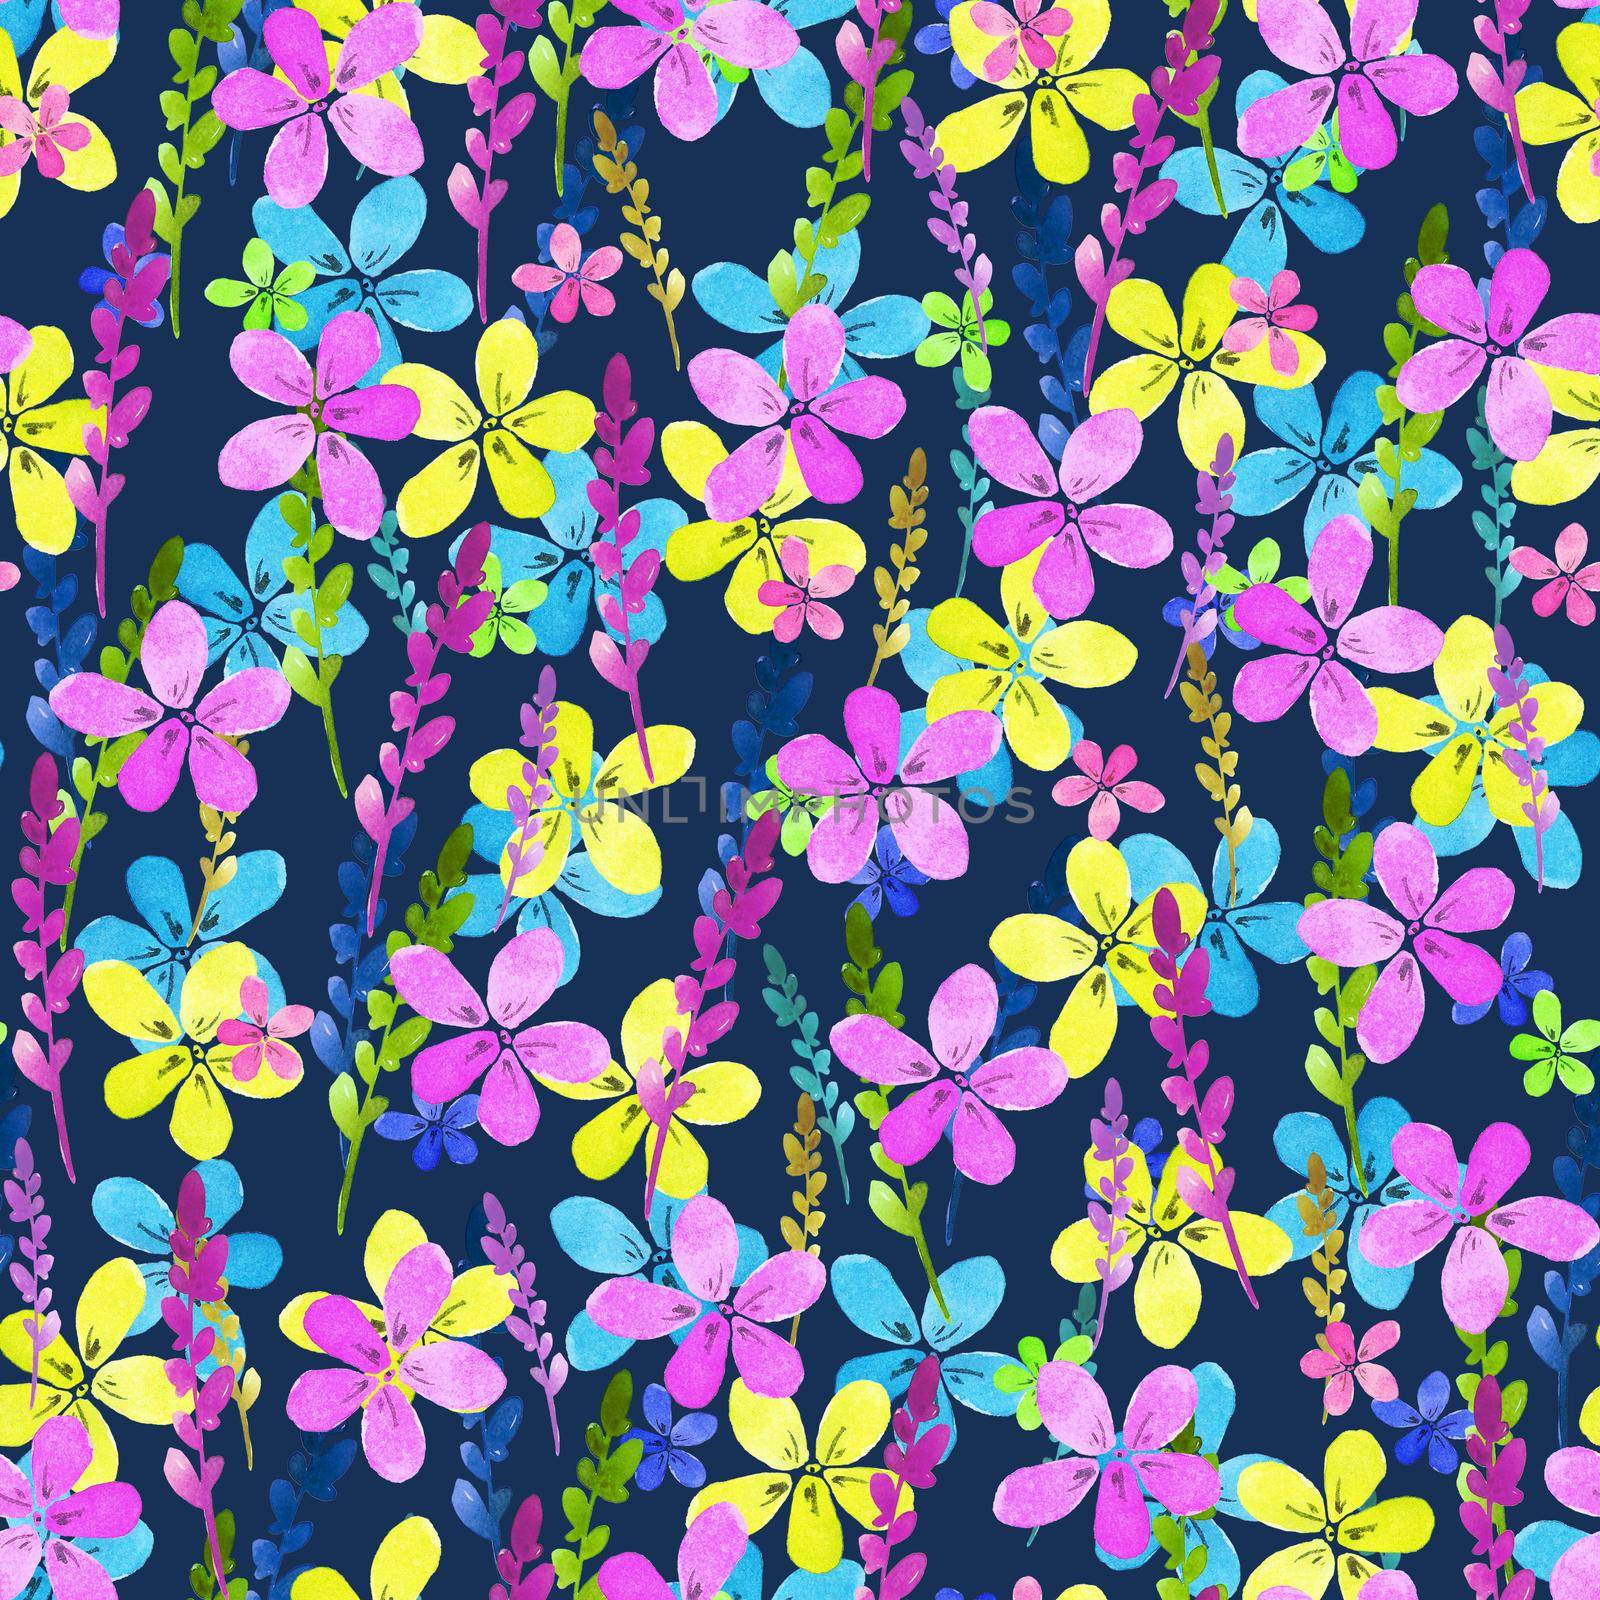 Seamless floral pattern with watercolor blue pink yellow flowers and leaves in vintage style on blue background. Hand made. Ornate for textile, fabric, wallpaper, print. Nature illustration. Painting elements.